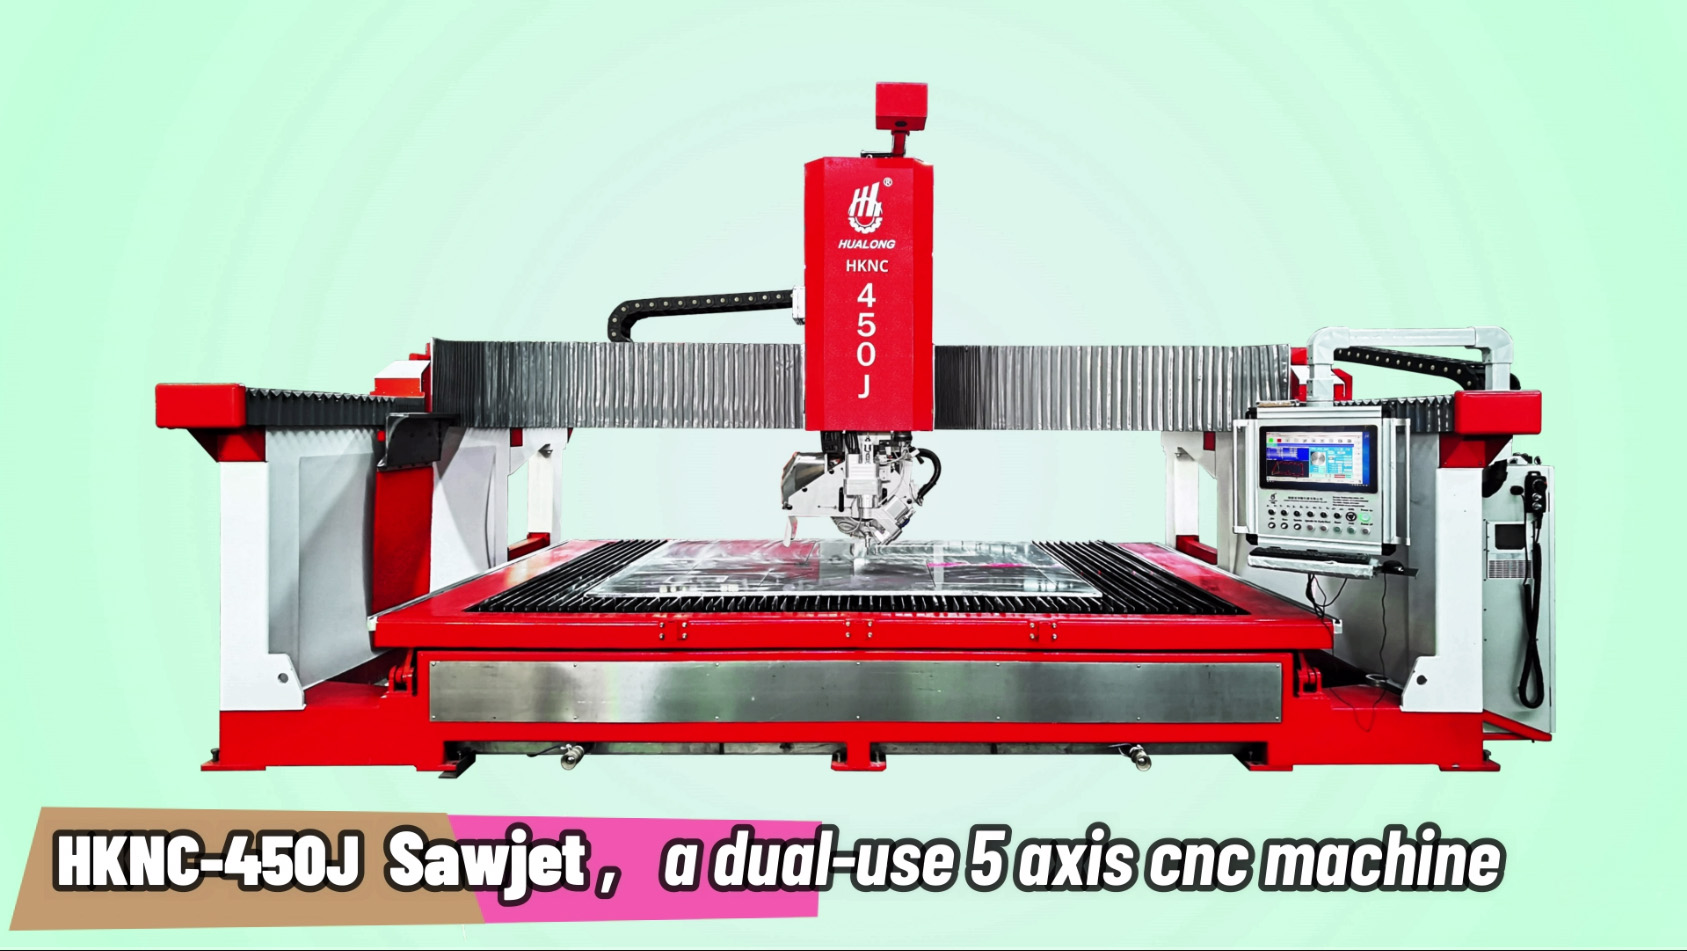 What is a sawjet?